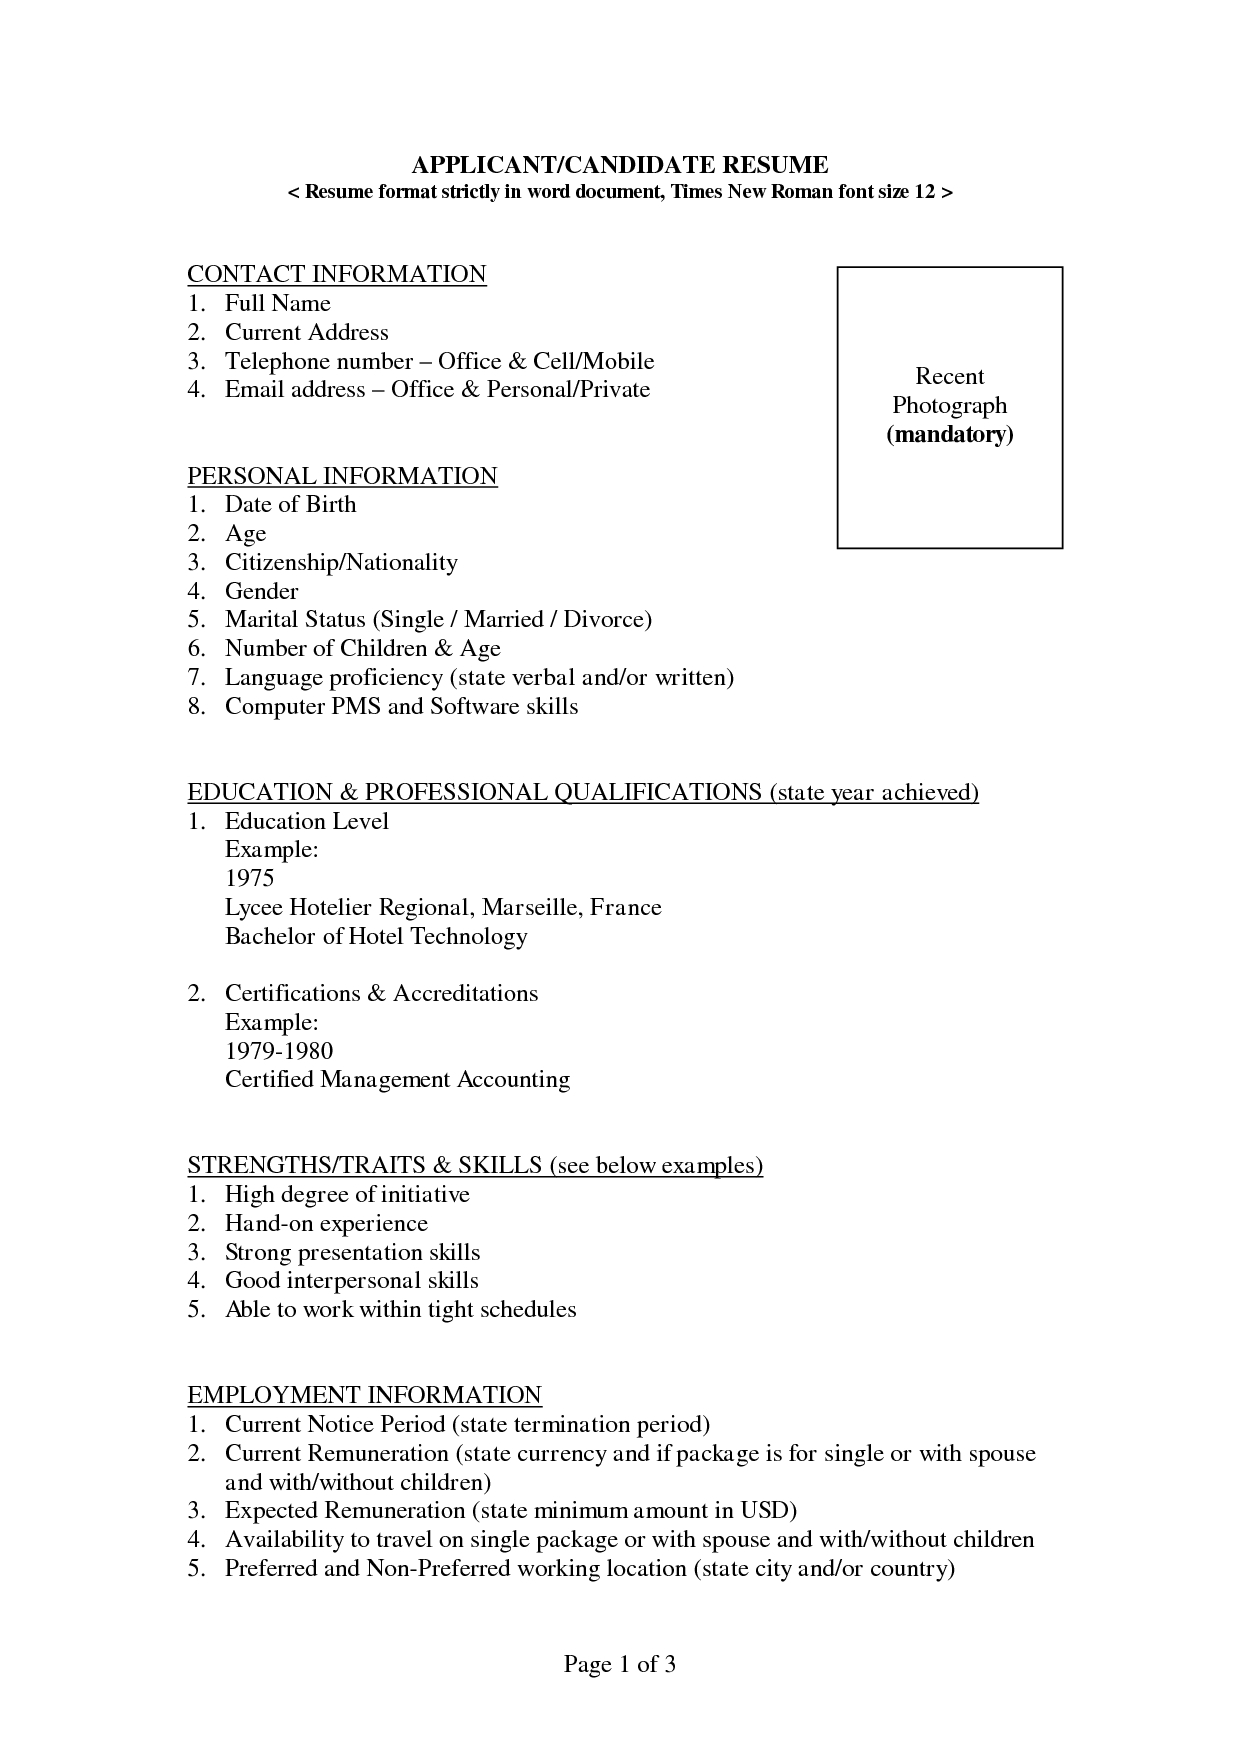 Free Blank Resume Templates For Microsoft Word | Resume Throughout Blank Resume Templates For Microsoft Word